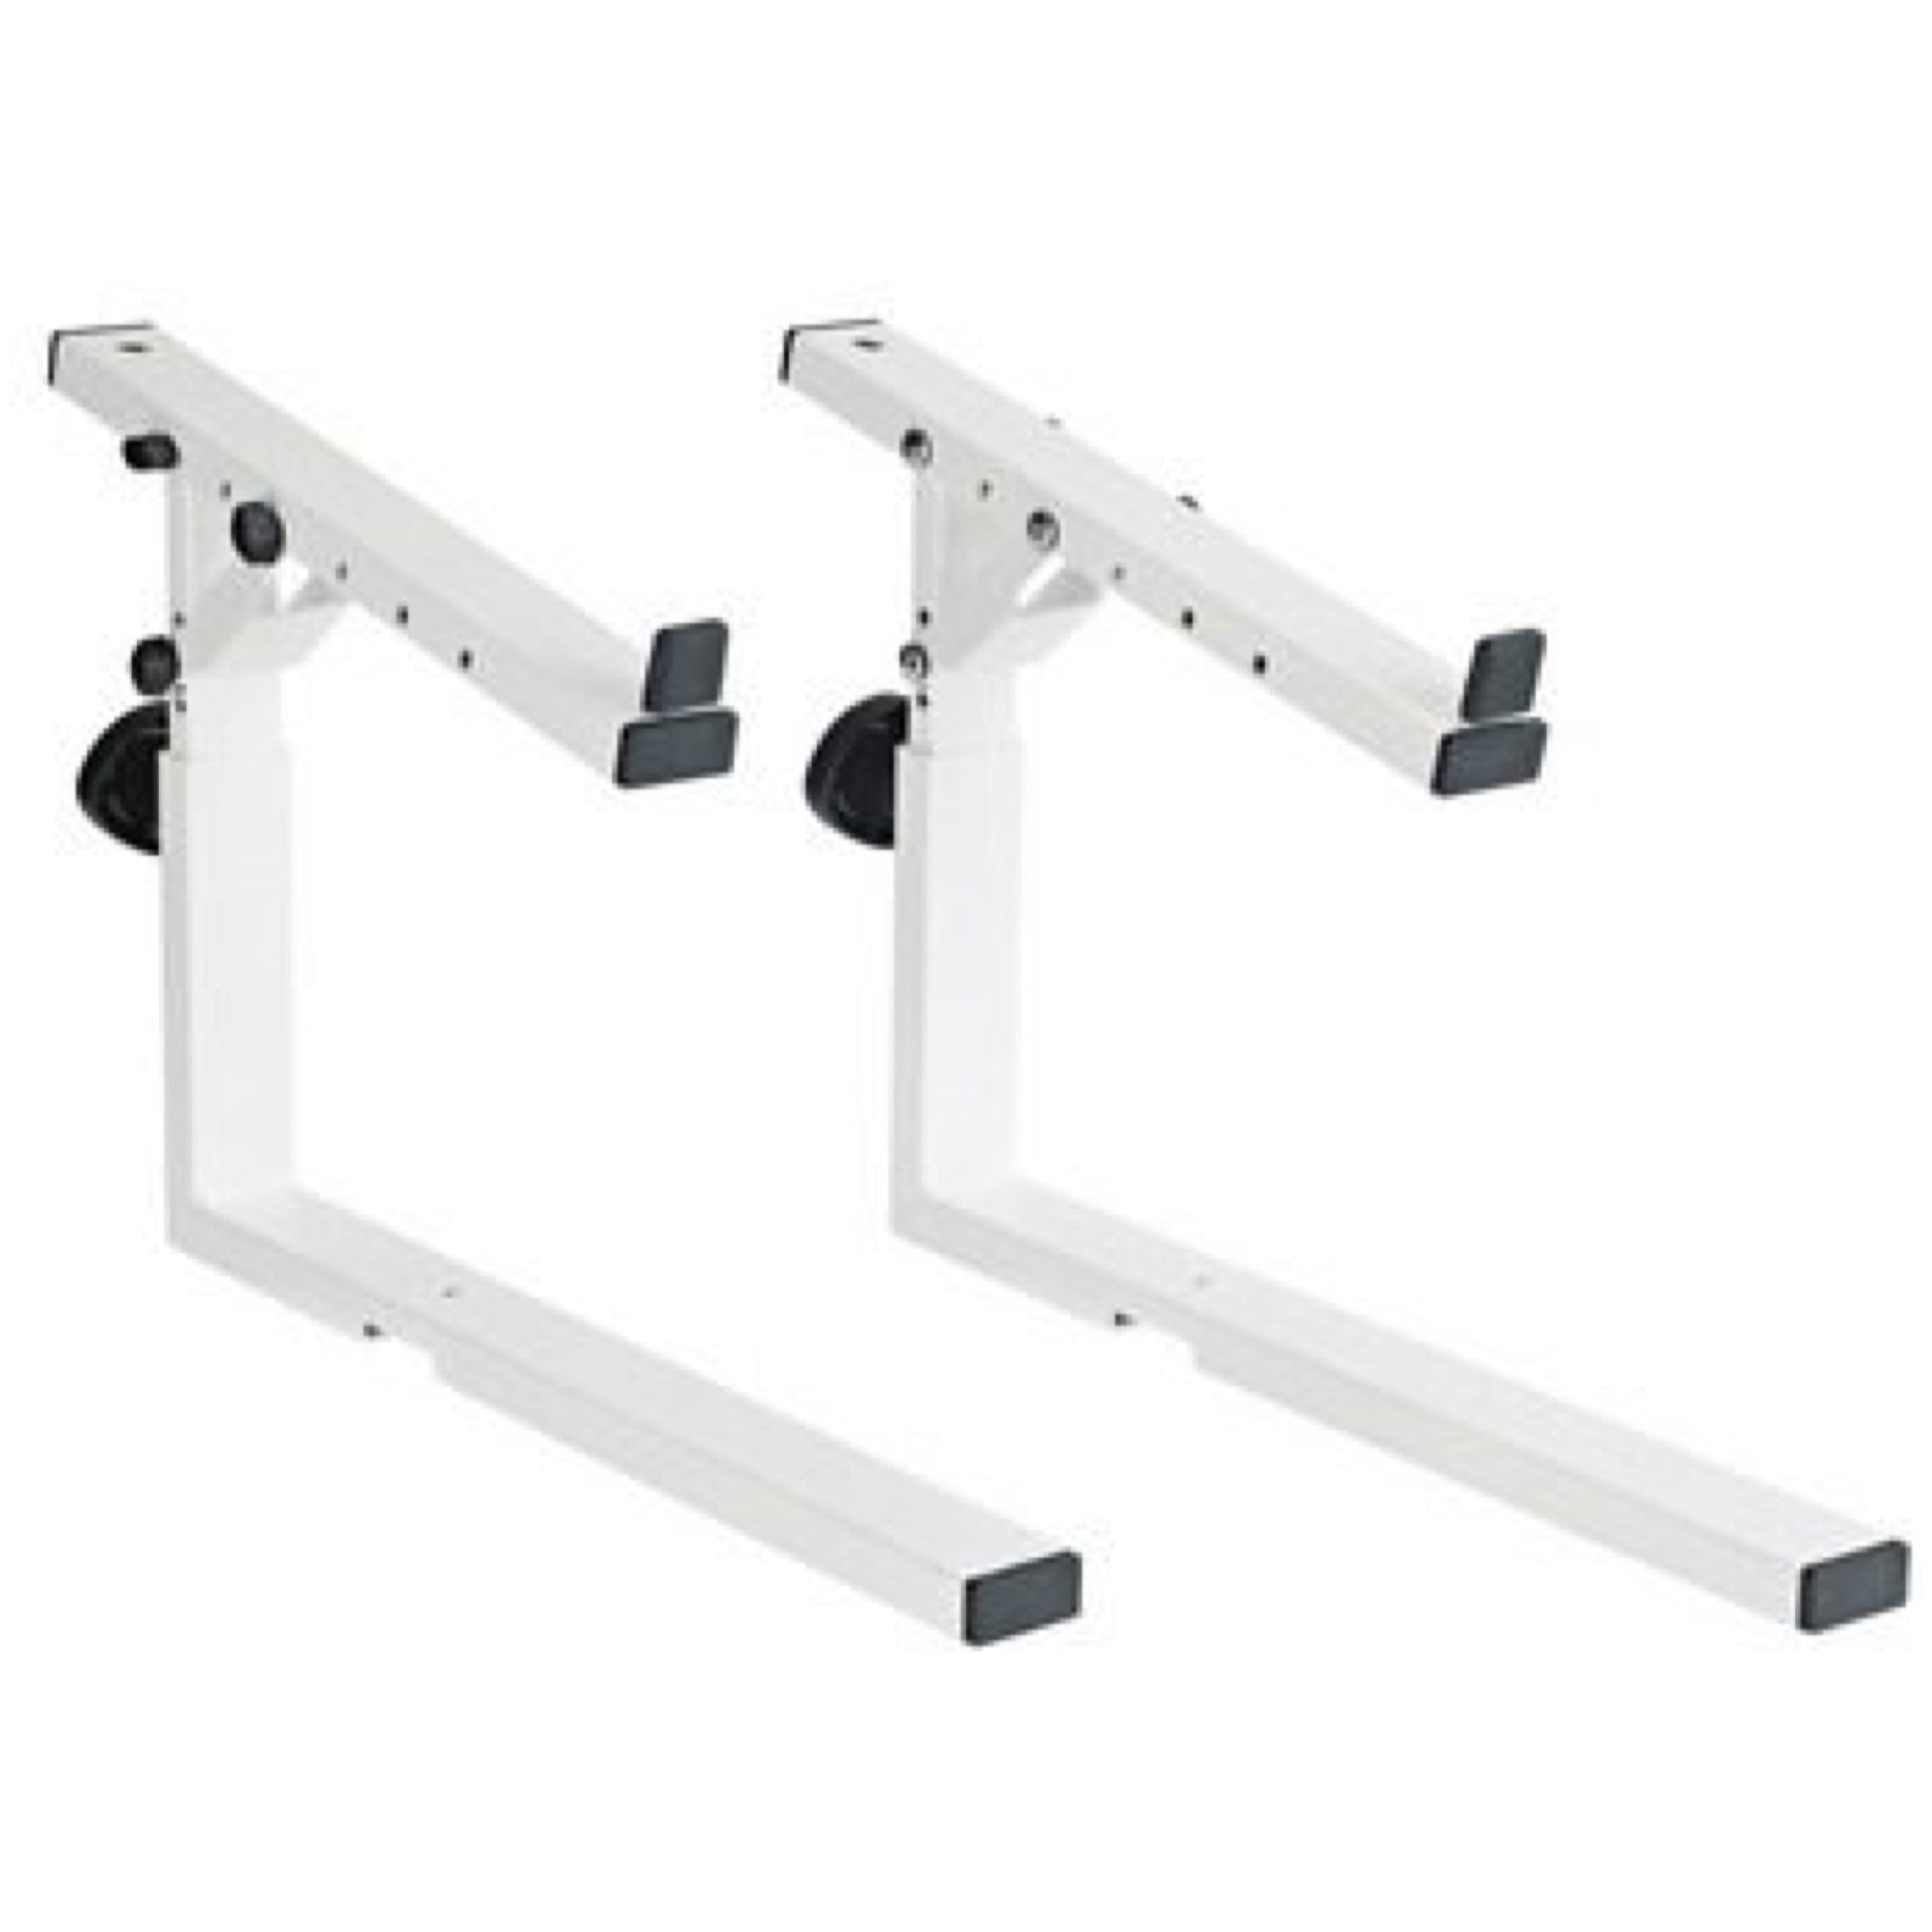 K&M 18811 Stacker 2nd Tier for Omega Keyboard Stand, White